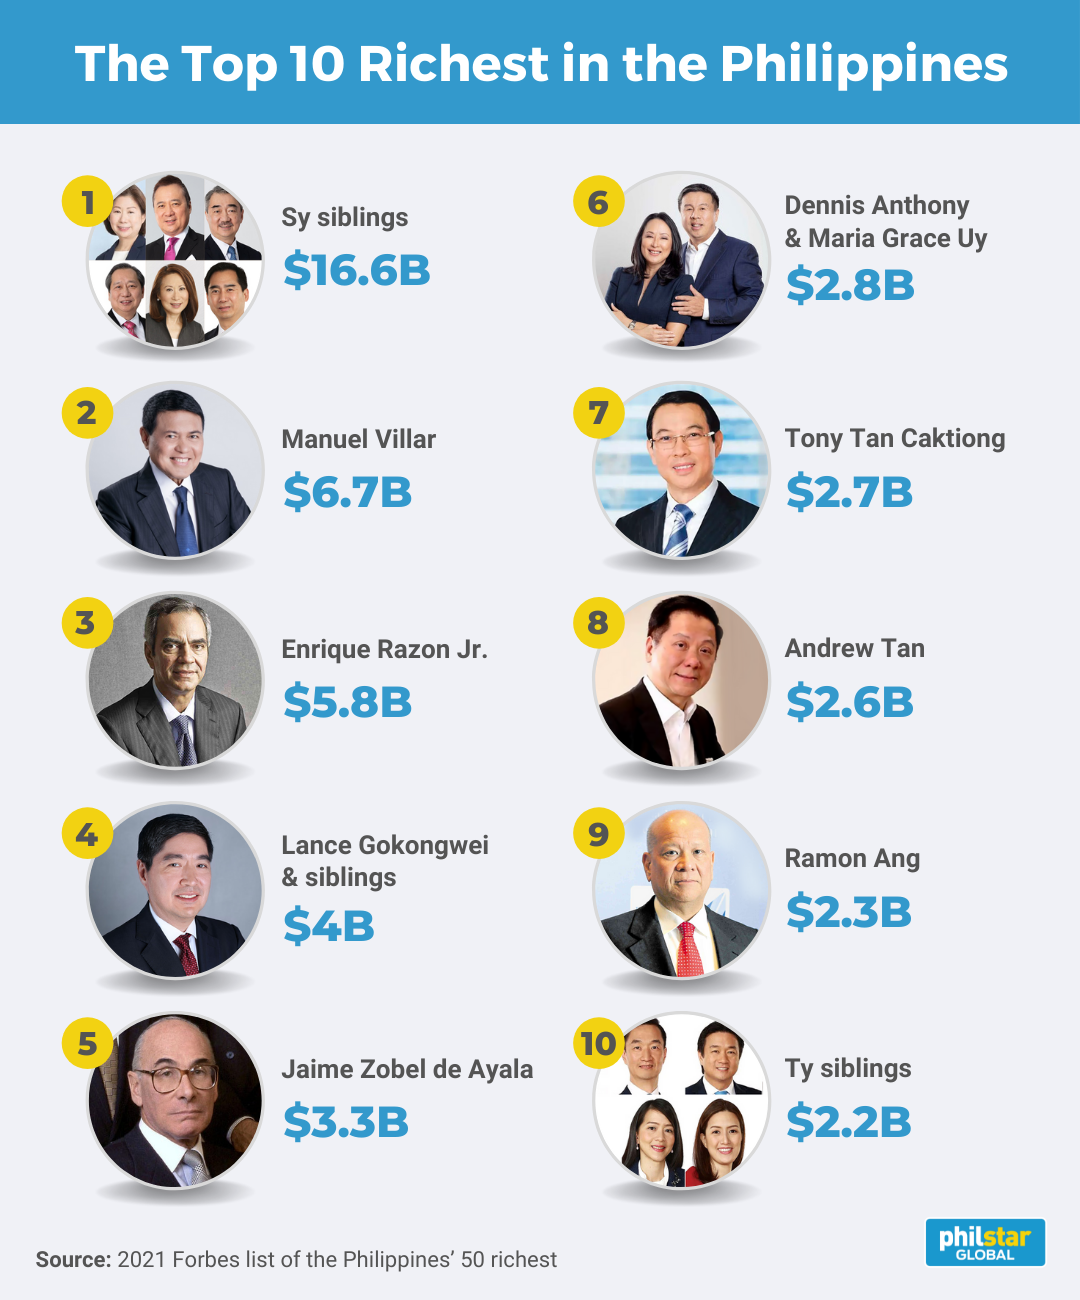 Sy heirs retain top spot in Philippines’ 50 richest list Philippines